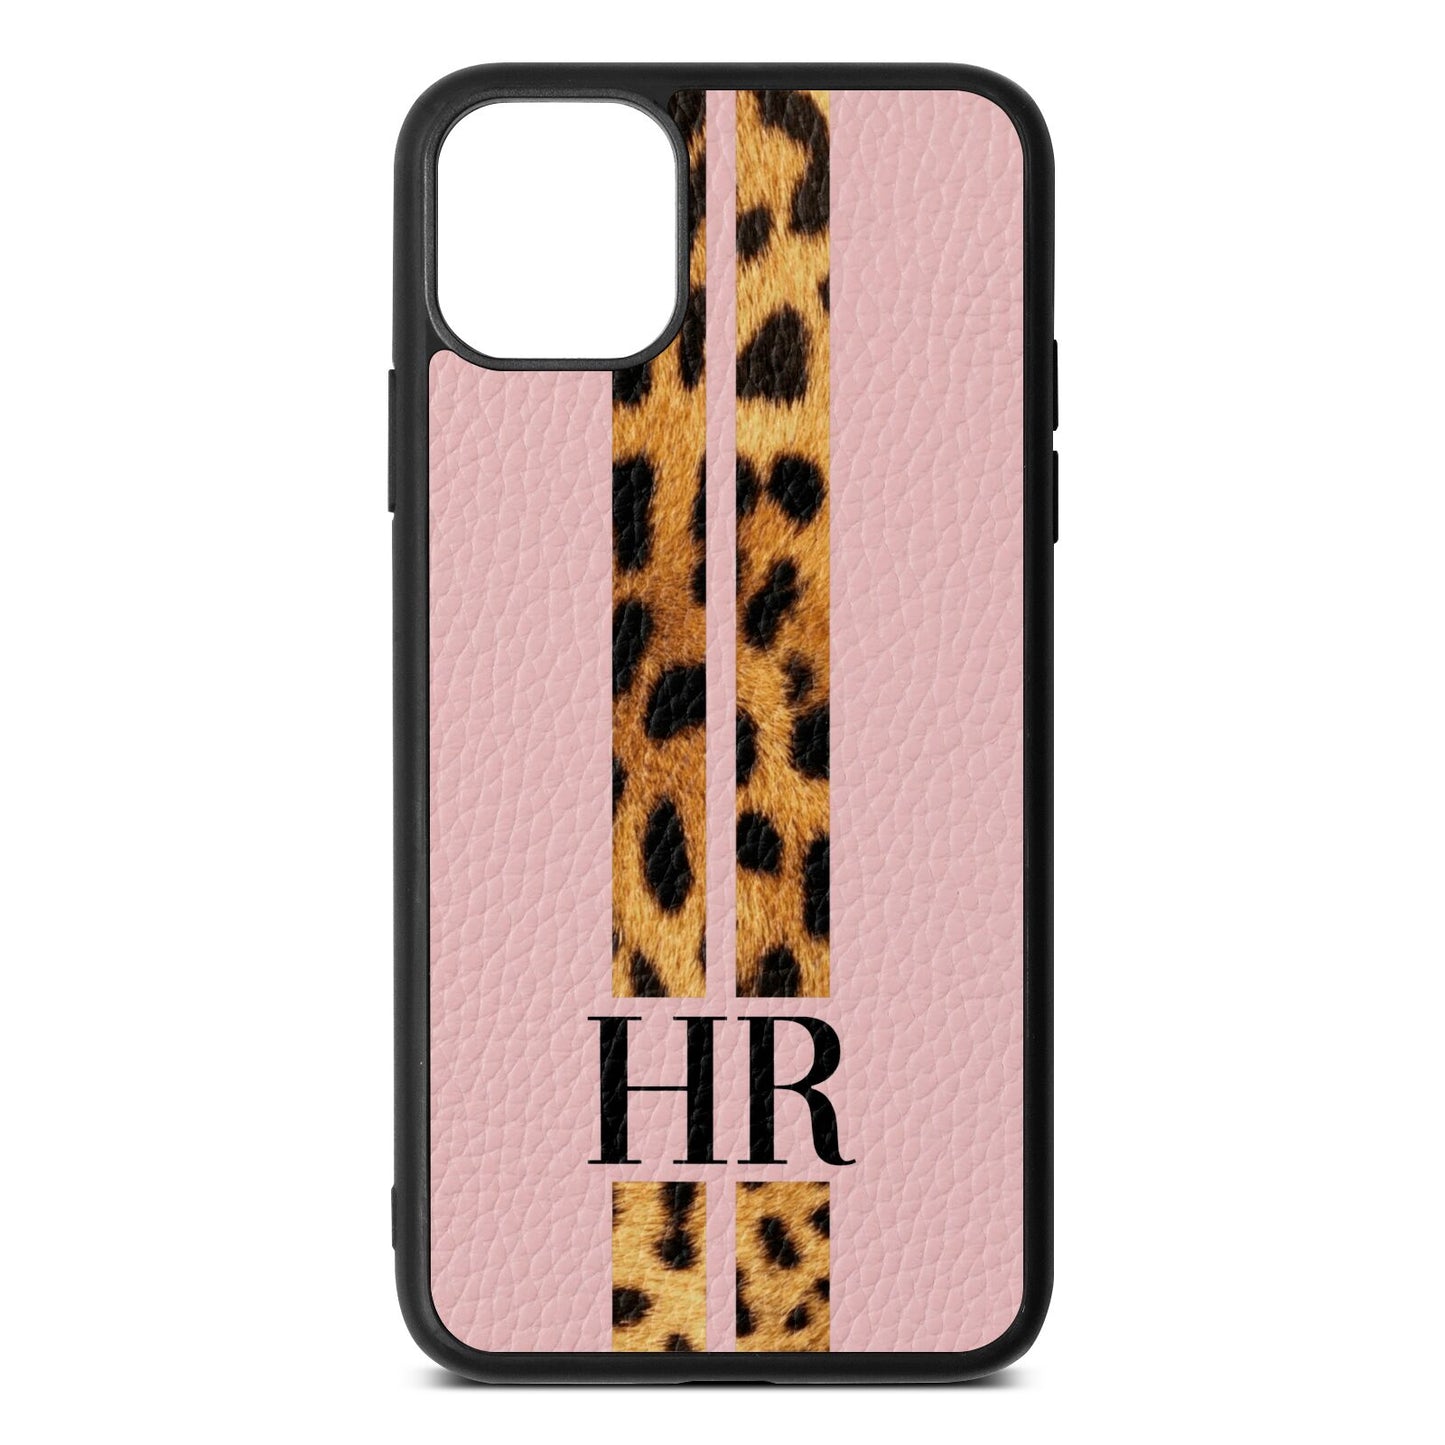 Initialled Leopard Print Stripes Pink Pebble Leather iPhone 11 Pro Max Case